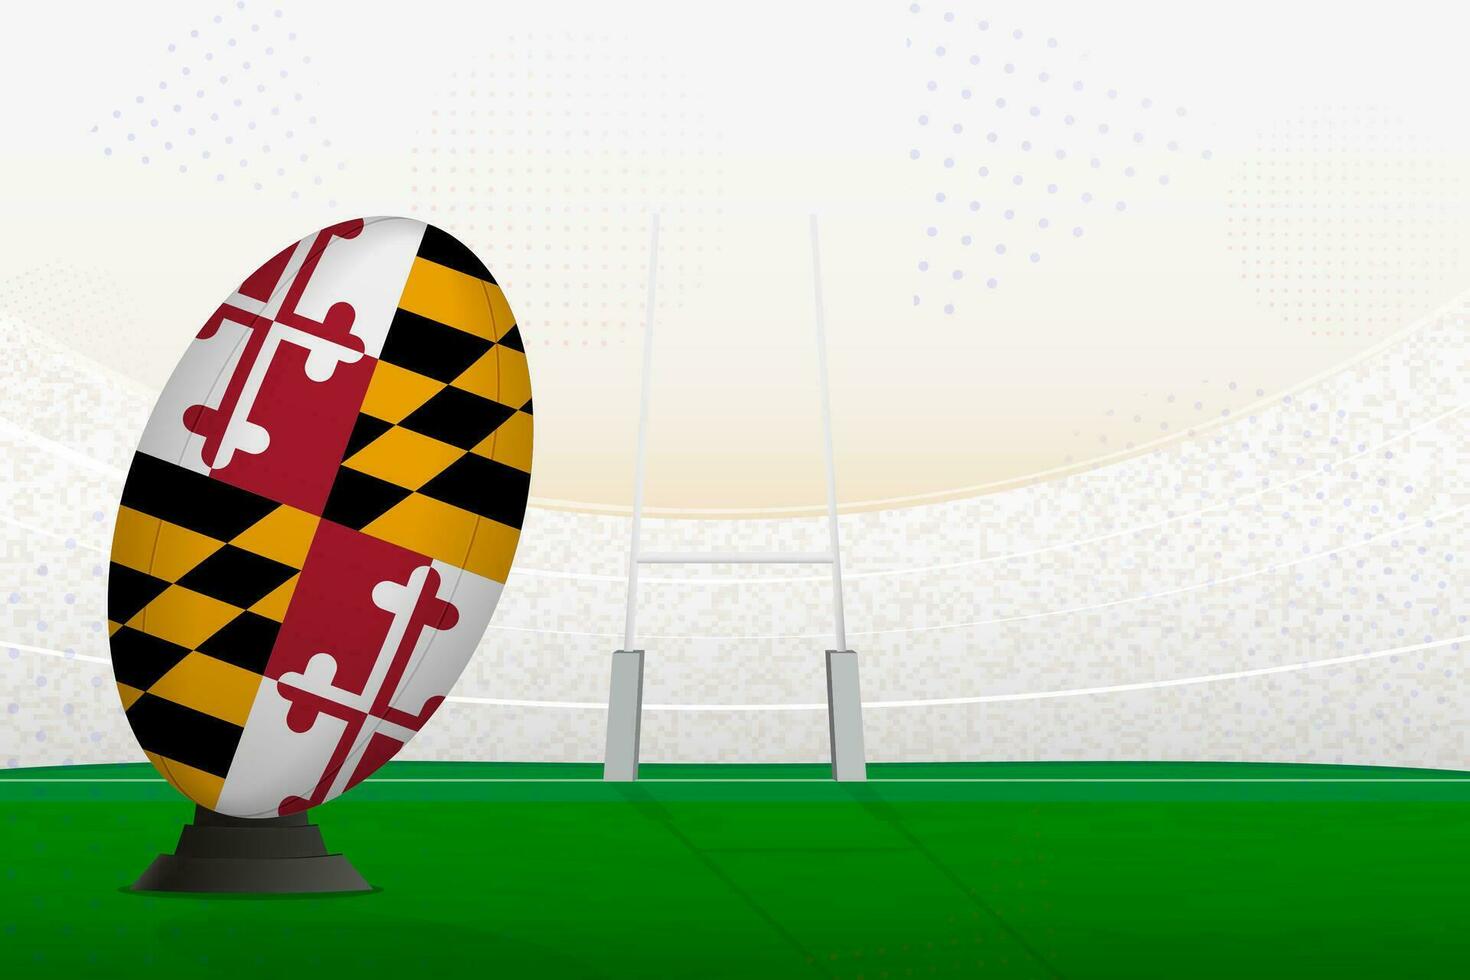 Maryland national team rugby ball on rugby stadium and goal posts, preparing for a penalty or free kick. vector